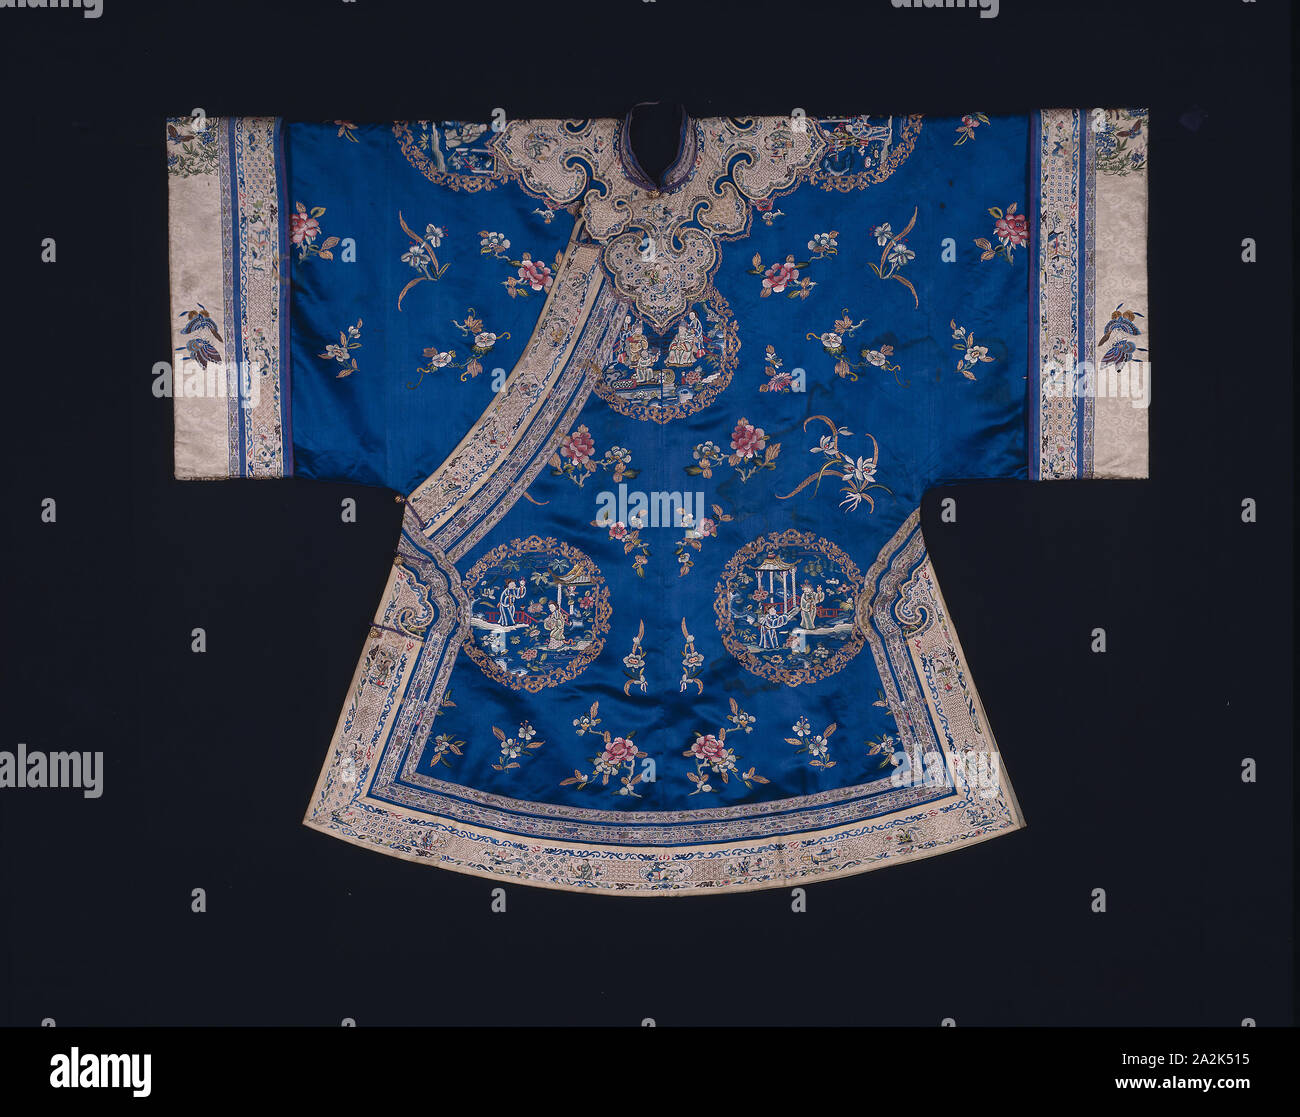 Woman’s Ao (Short Robe), Qing dynasty (1644–1911), 1875/1900, Han-Chinese, China, Silk, warp-float faced 7:1 satin weave, embroidered with silk and gold-leaf-over-lacquered-paper-strip-wrapped silk in knot, satin and stem stitches, laid work and couching, sleeve facing: silk, 7:1 satin damask weave, embroidered with silk and gilt-metal-strip-wrapped silk in knot, satin, single satin, split, and stem stitches (under drawing in black ink or graphite), edging and cloud collar: silk, warp-float faced 7:1 satin weave, embroidered with silk and gold-leaf-over-lacquered-paper-wrapped silk in satin Stock Photo